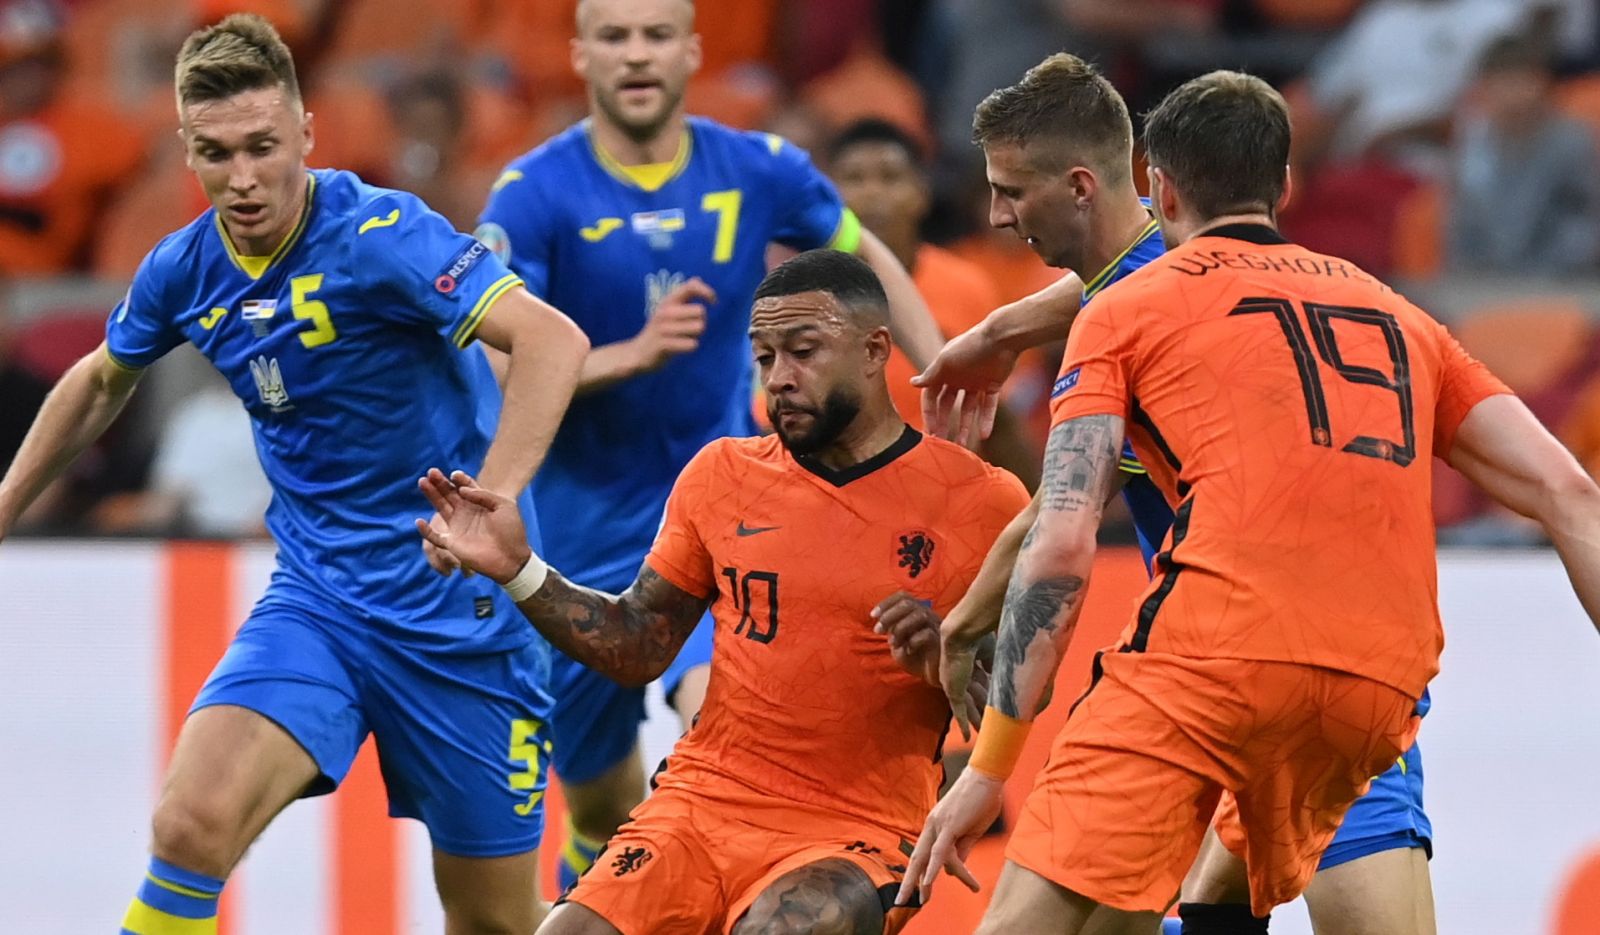 epa09268737 Memphis Depay (C) of the Netherlands in action against Serhiy Sydorchuk (L) of Ukraine during the UEFA EURO 2020 preliminary round group C match between the Netherlands and Ukraine in Amsterdam, the Netherlands, 13 June 2021.  EPA/John Thys / POOL (RESTRICTIONS: For editorial news reporting purposes only. Images must appear as still images and must not emulate match action video footage. Photographs published in online publications shall have an interval of at least 20 seconds between the posting.)